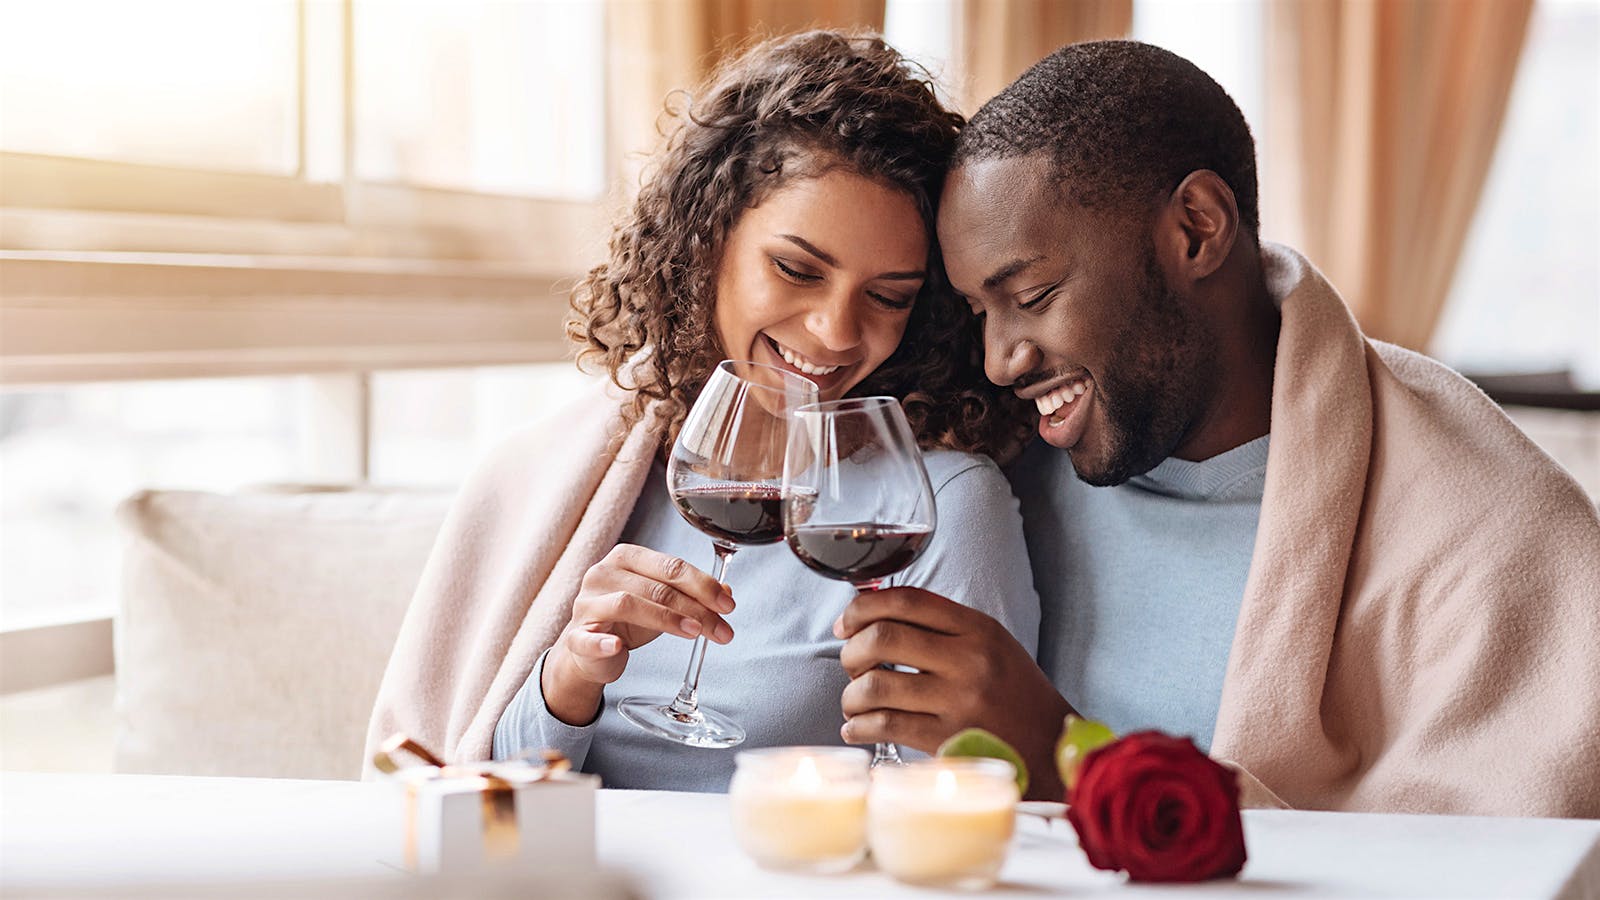 Your Love Life May Affect Your Taste in Wine